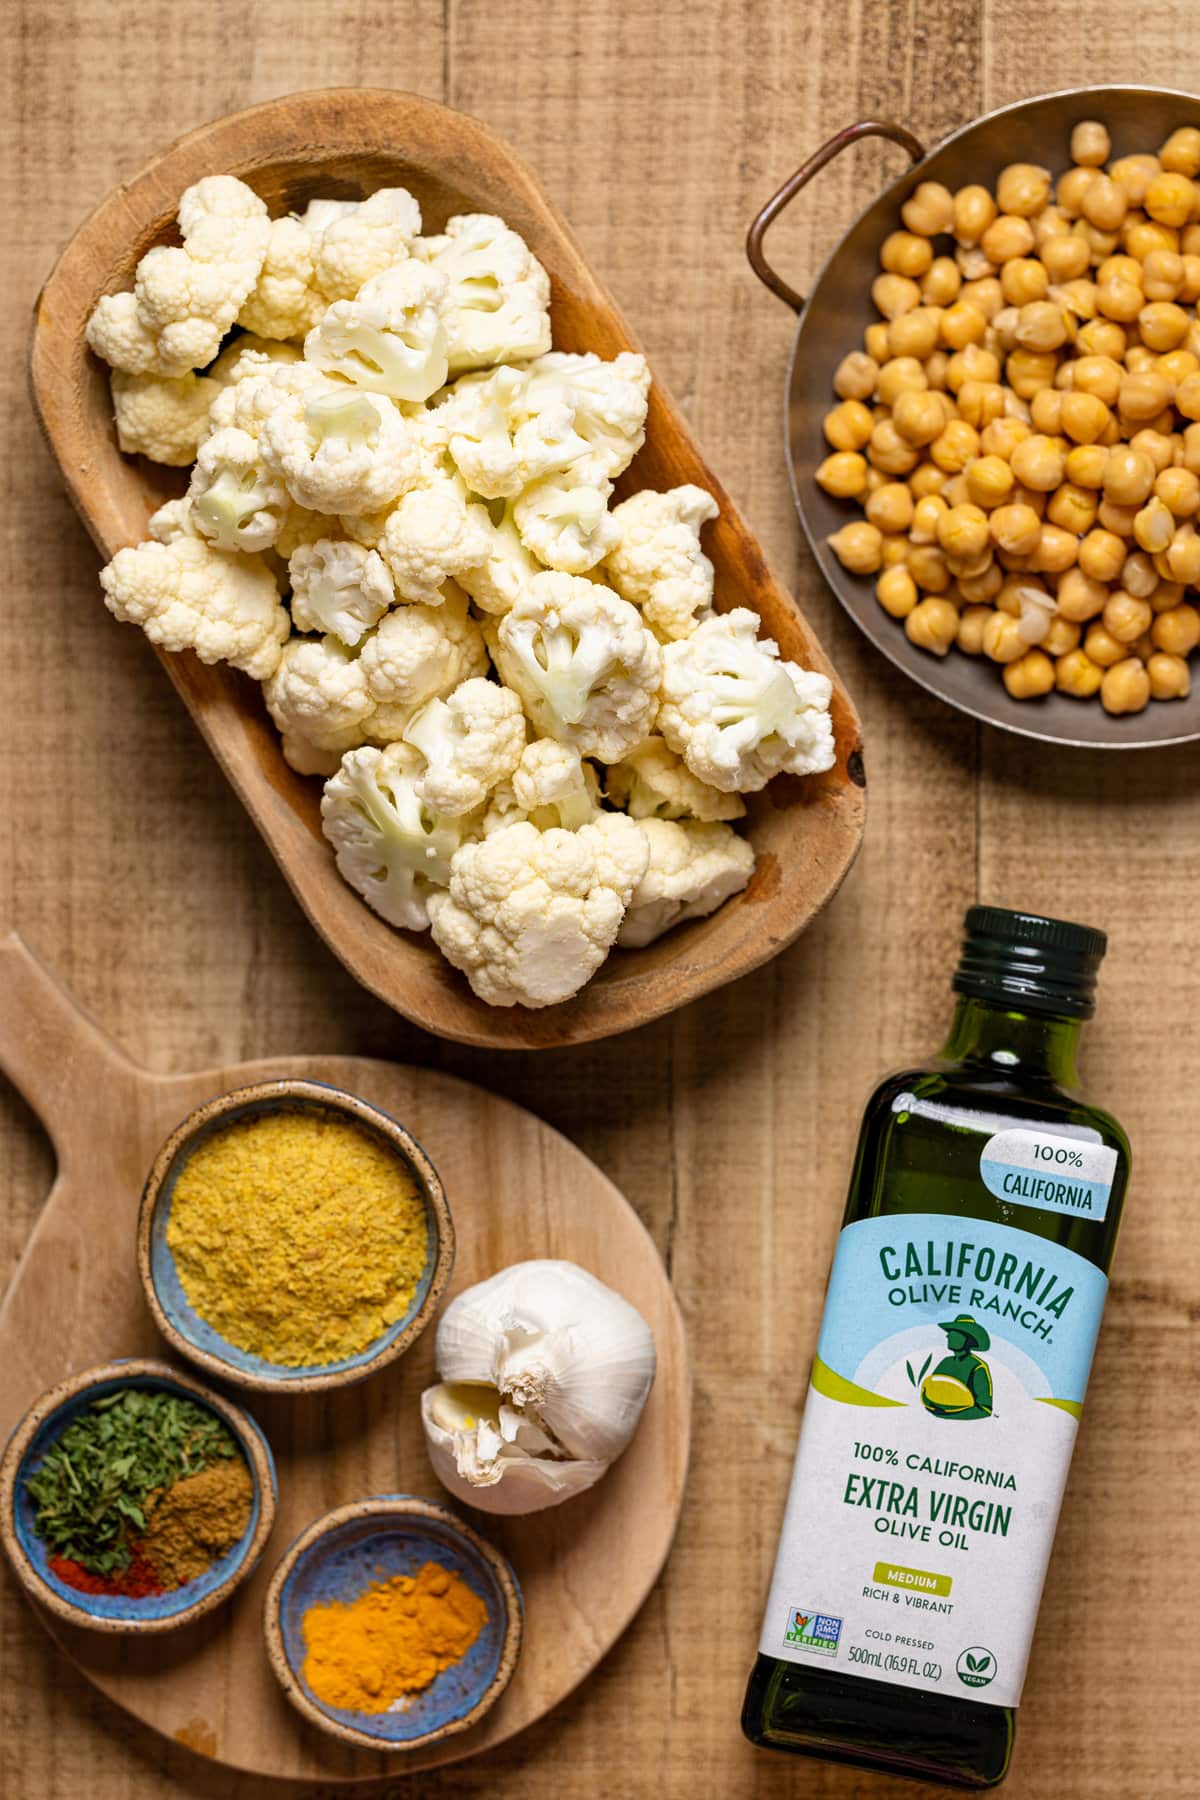 Ingredients for Creamy Roasted Garlic Cauliflower Chickpea Soup including olive oil, chickpeas, and cauliflower